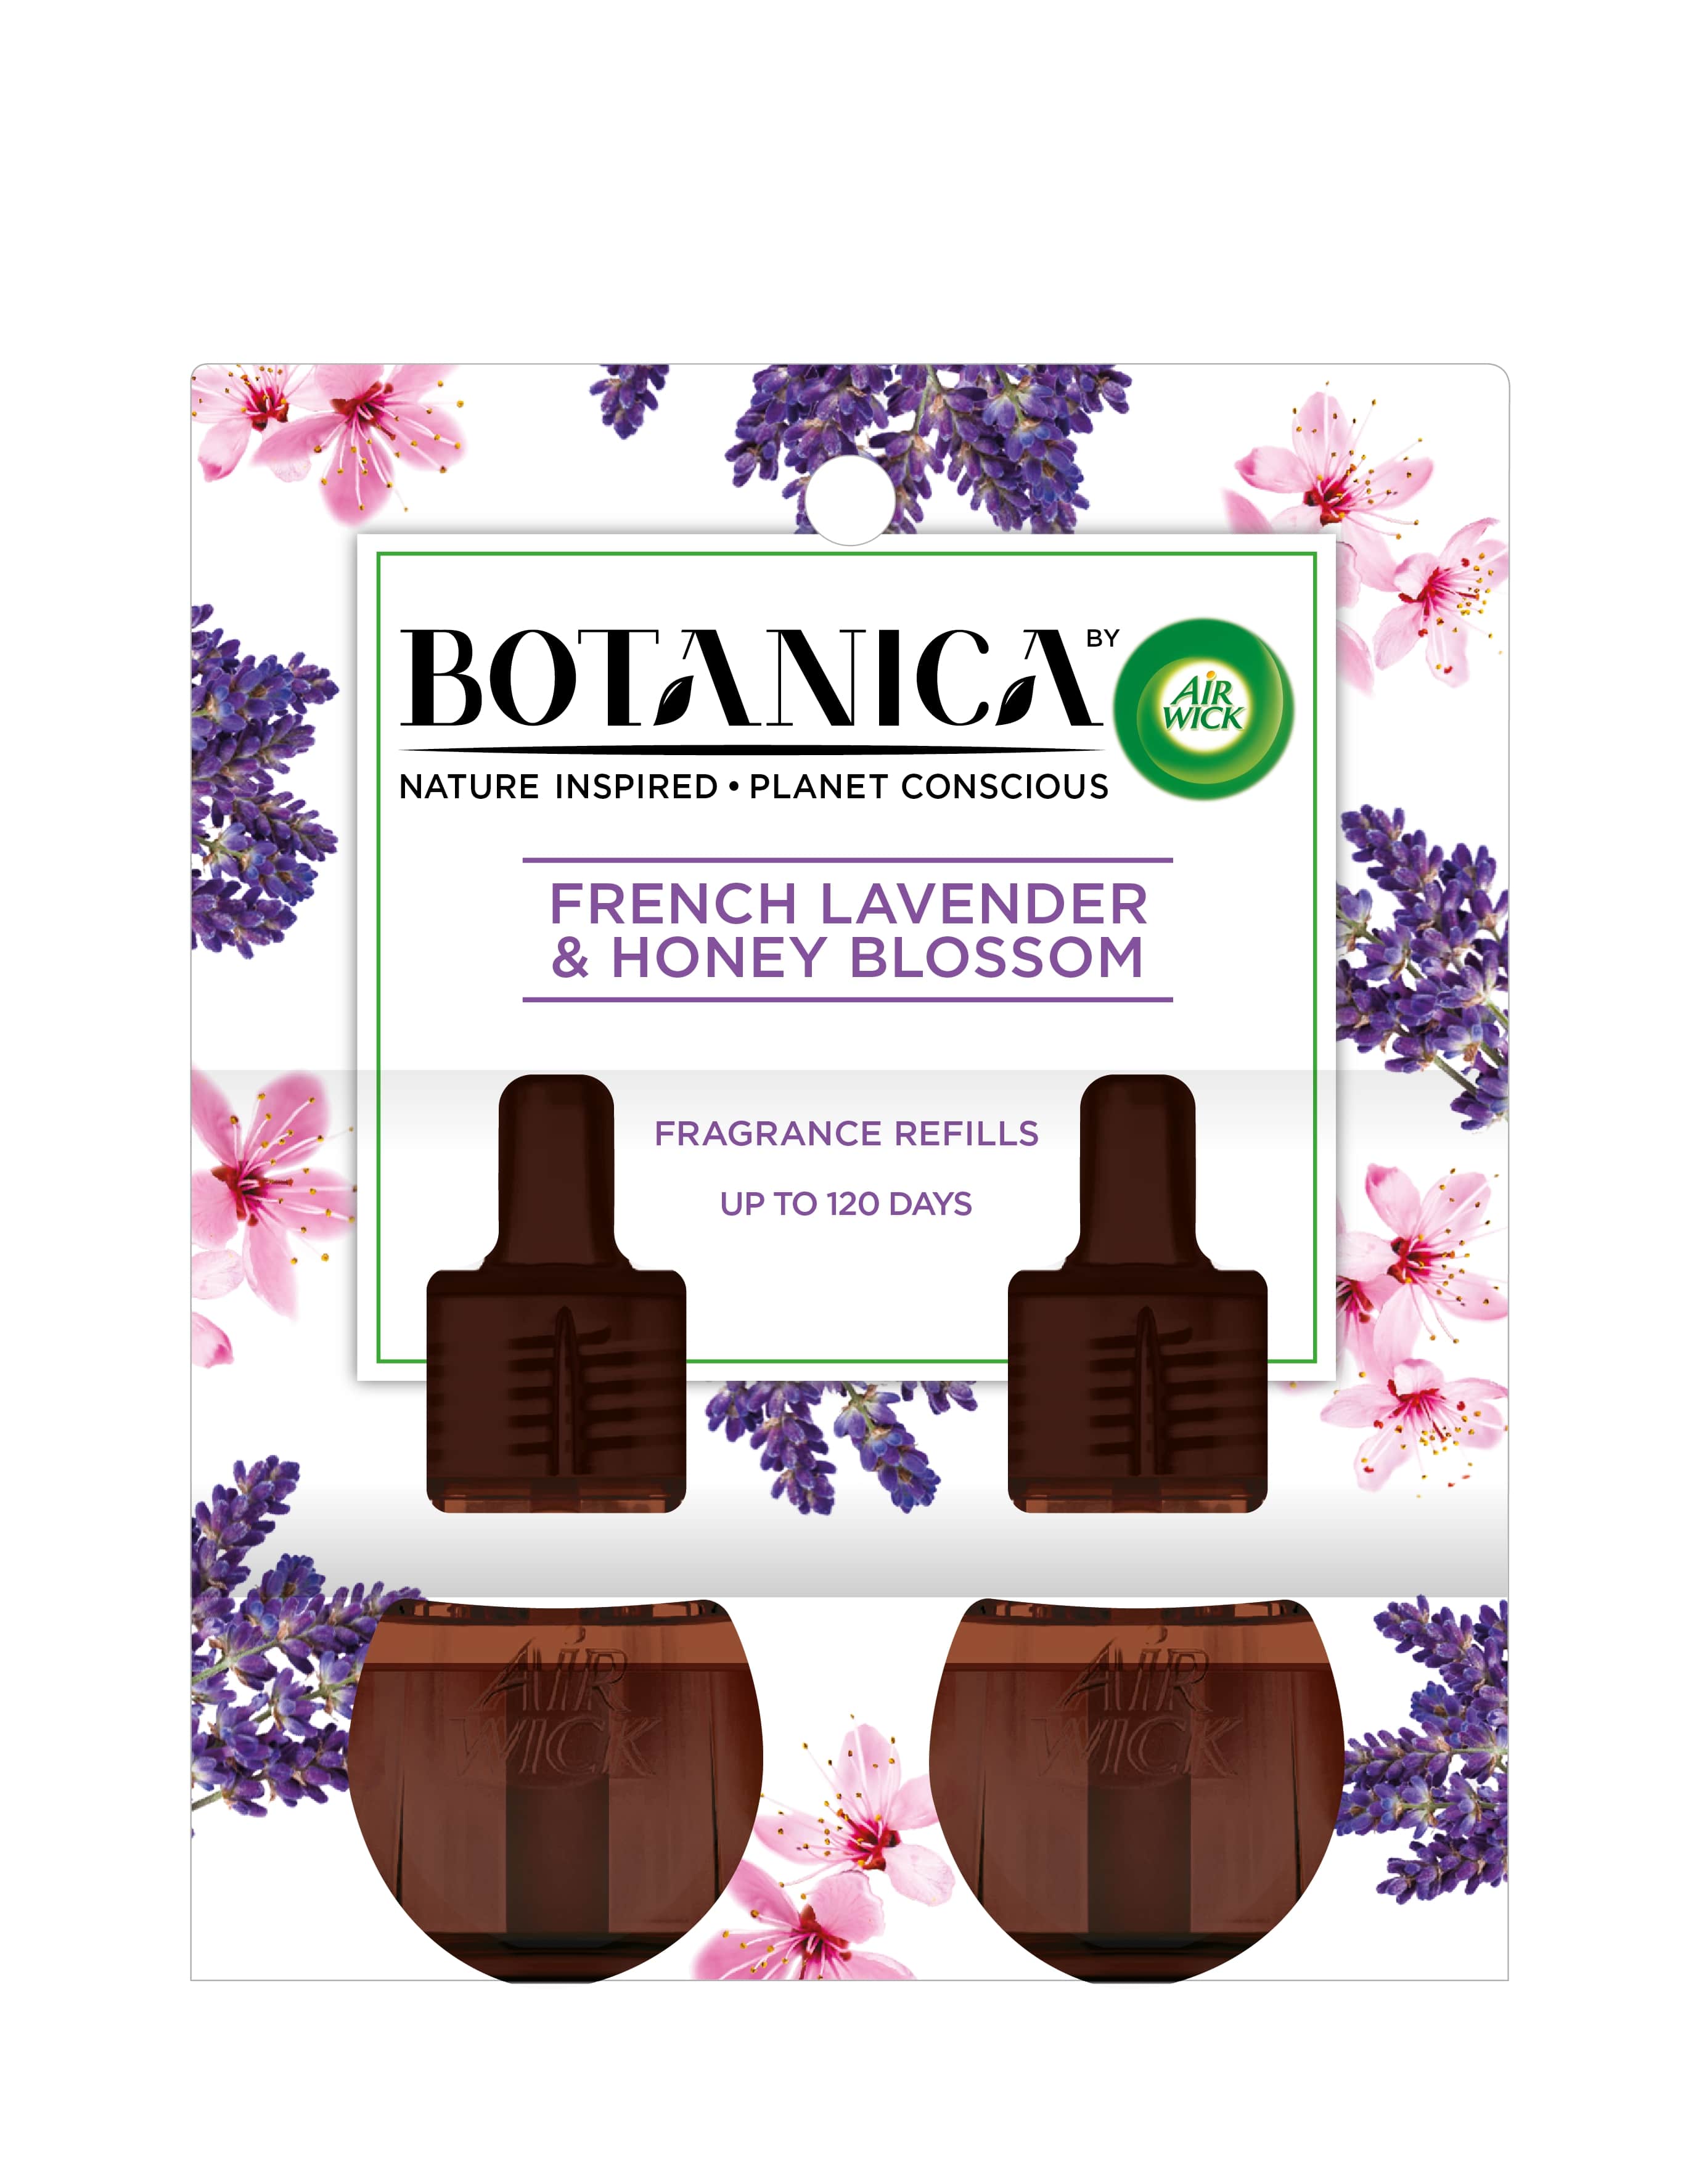 AIR WICK® Botanica Scented Oil - French Lavender & Honey Blossom (Discontinued)